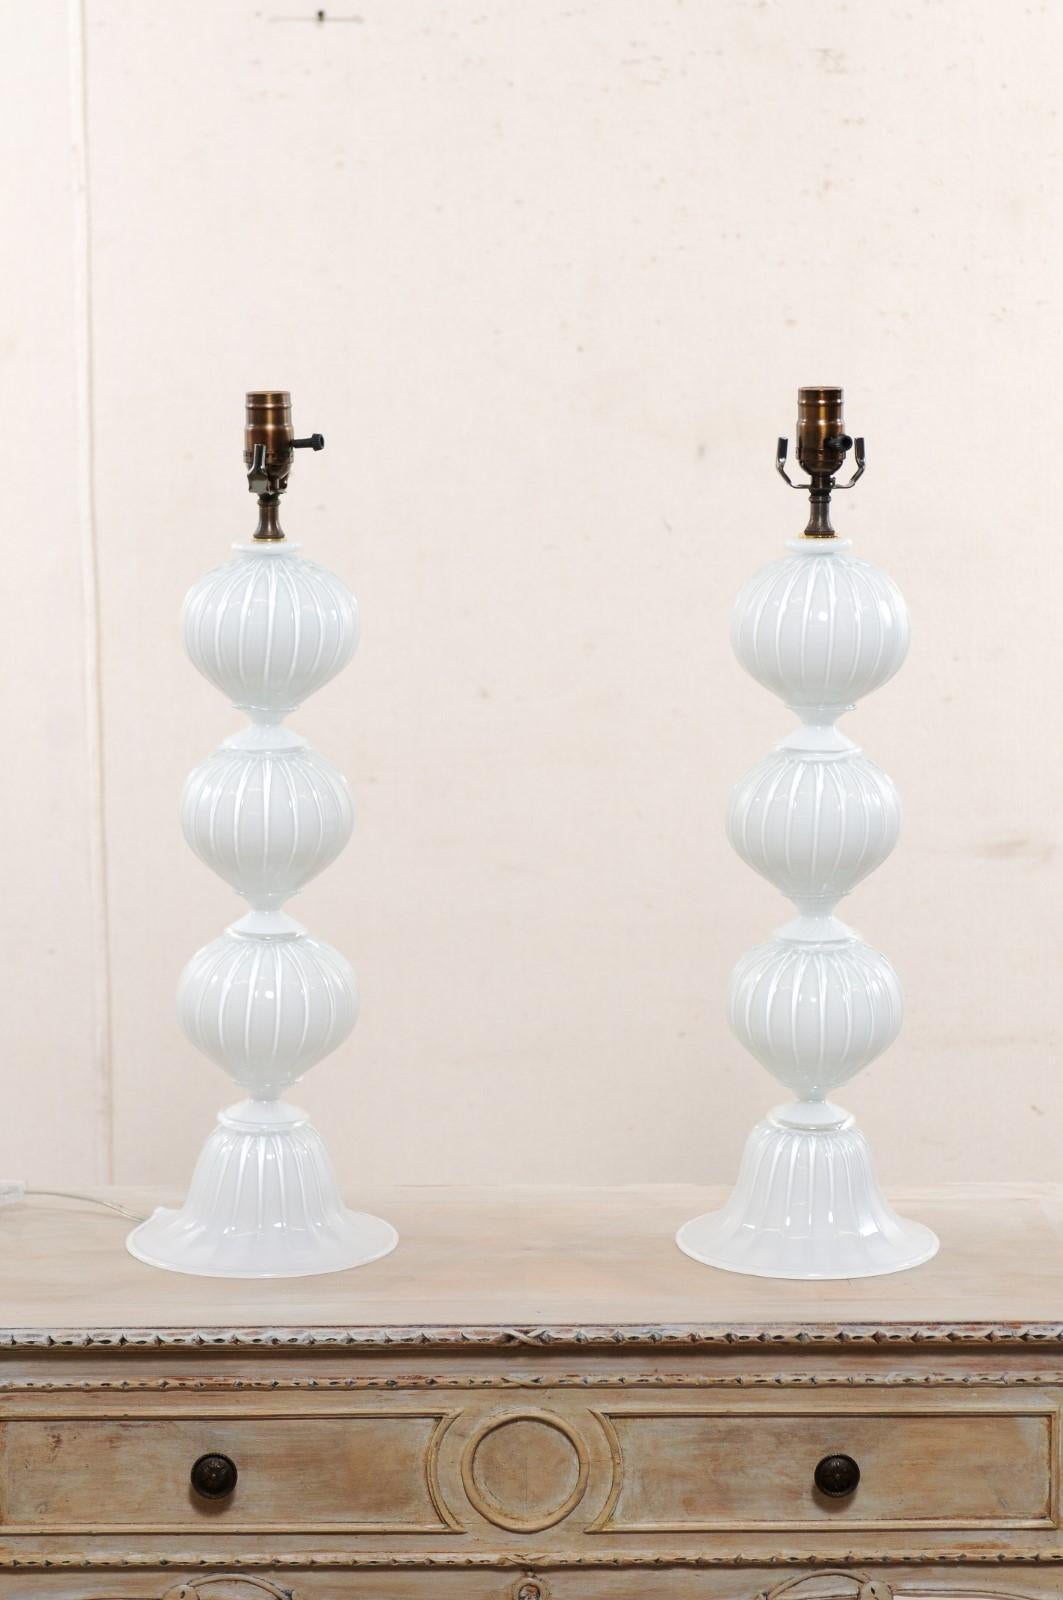 An Italian pair of hand-blown murano glass table lamps These classic designed Italian table lamps, created by expert glass masters in the Venetian island of Murano, Italy, each lamp features a beautifully stacked column of striped spheres in a